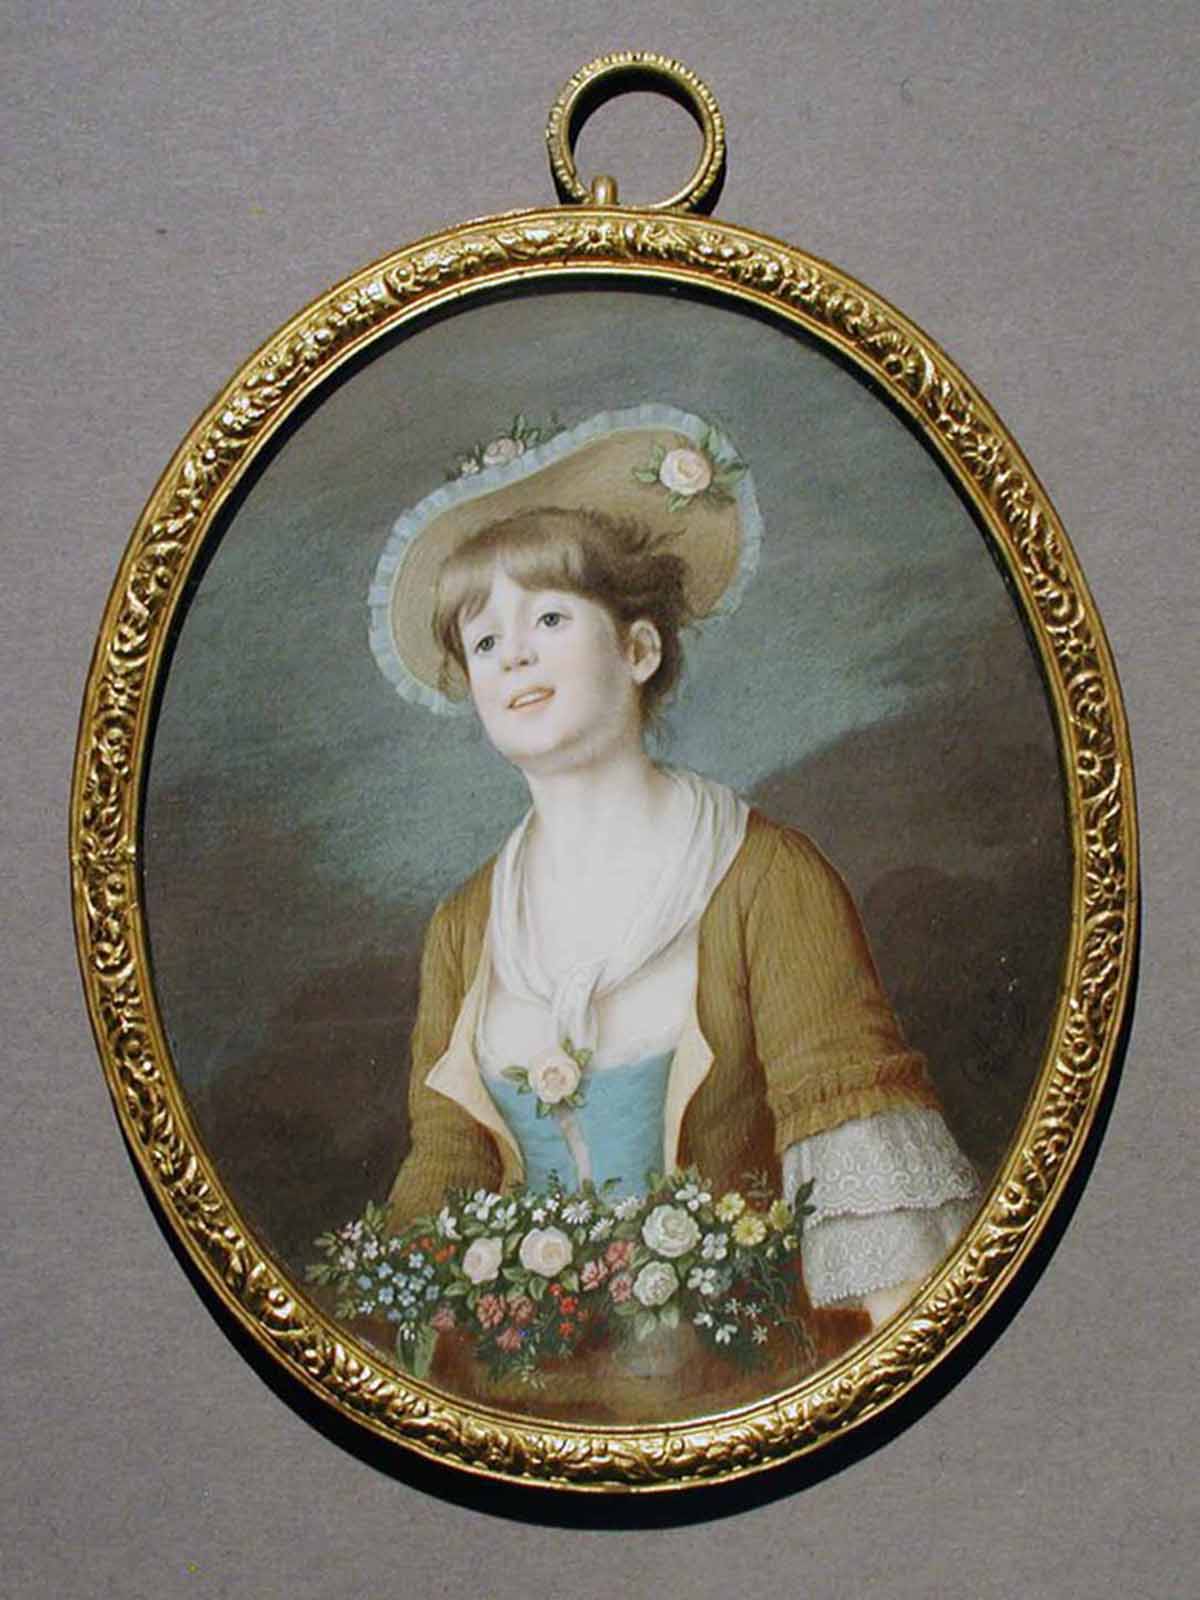 A miniature watercolor portrait of a young woman with a bouquet of flowers at her waist is painted on an oval-shaped piece of ivory with a gold frame.